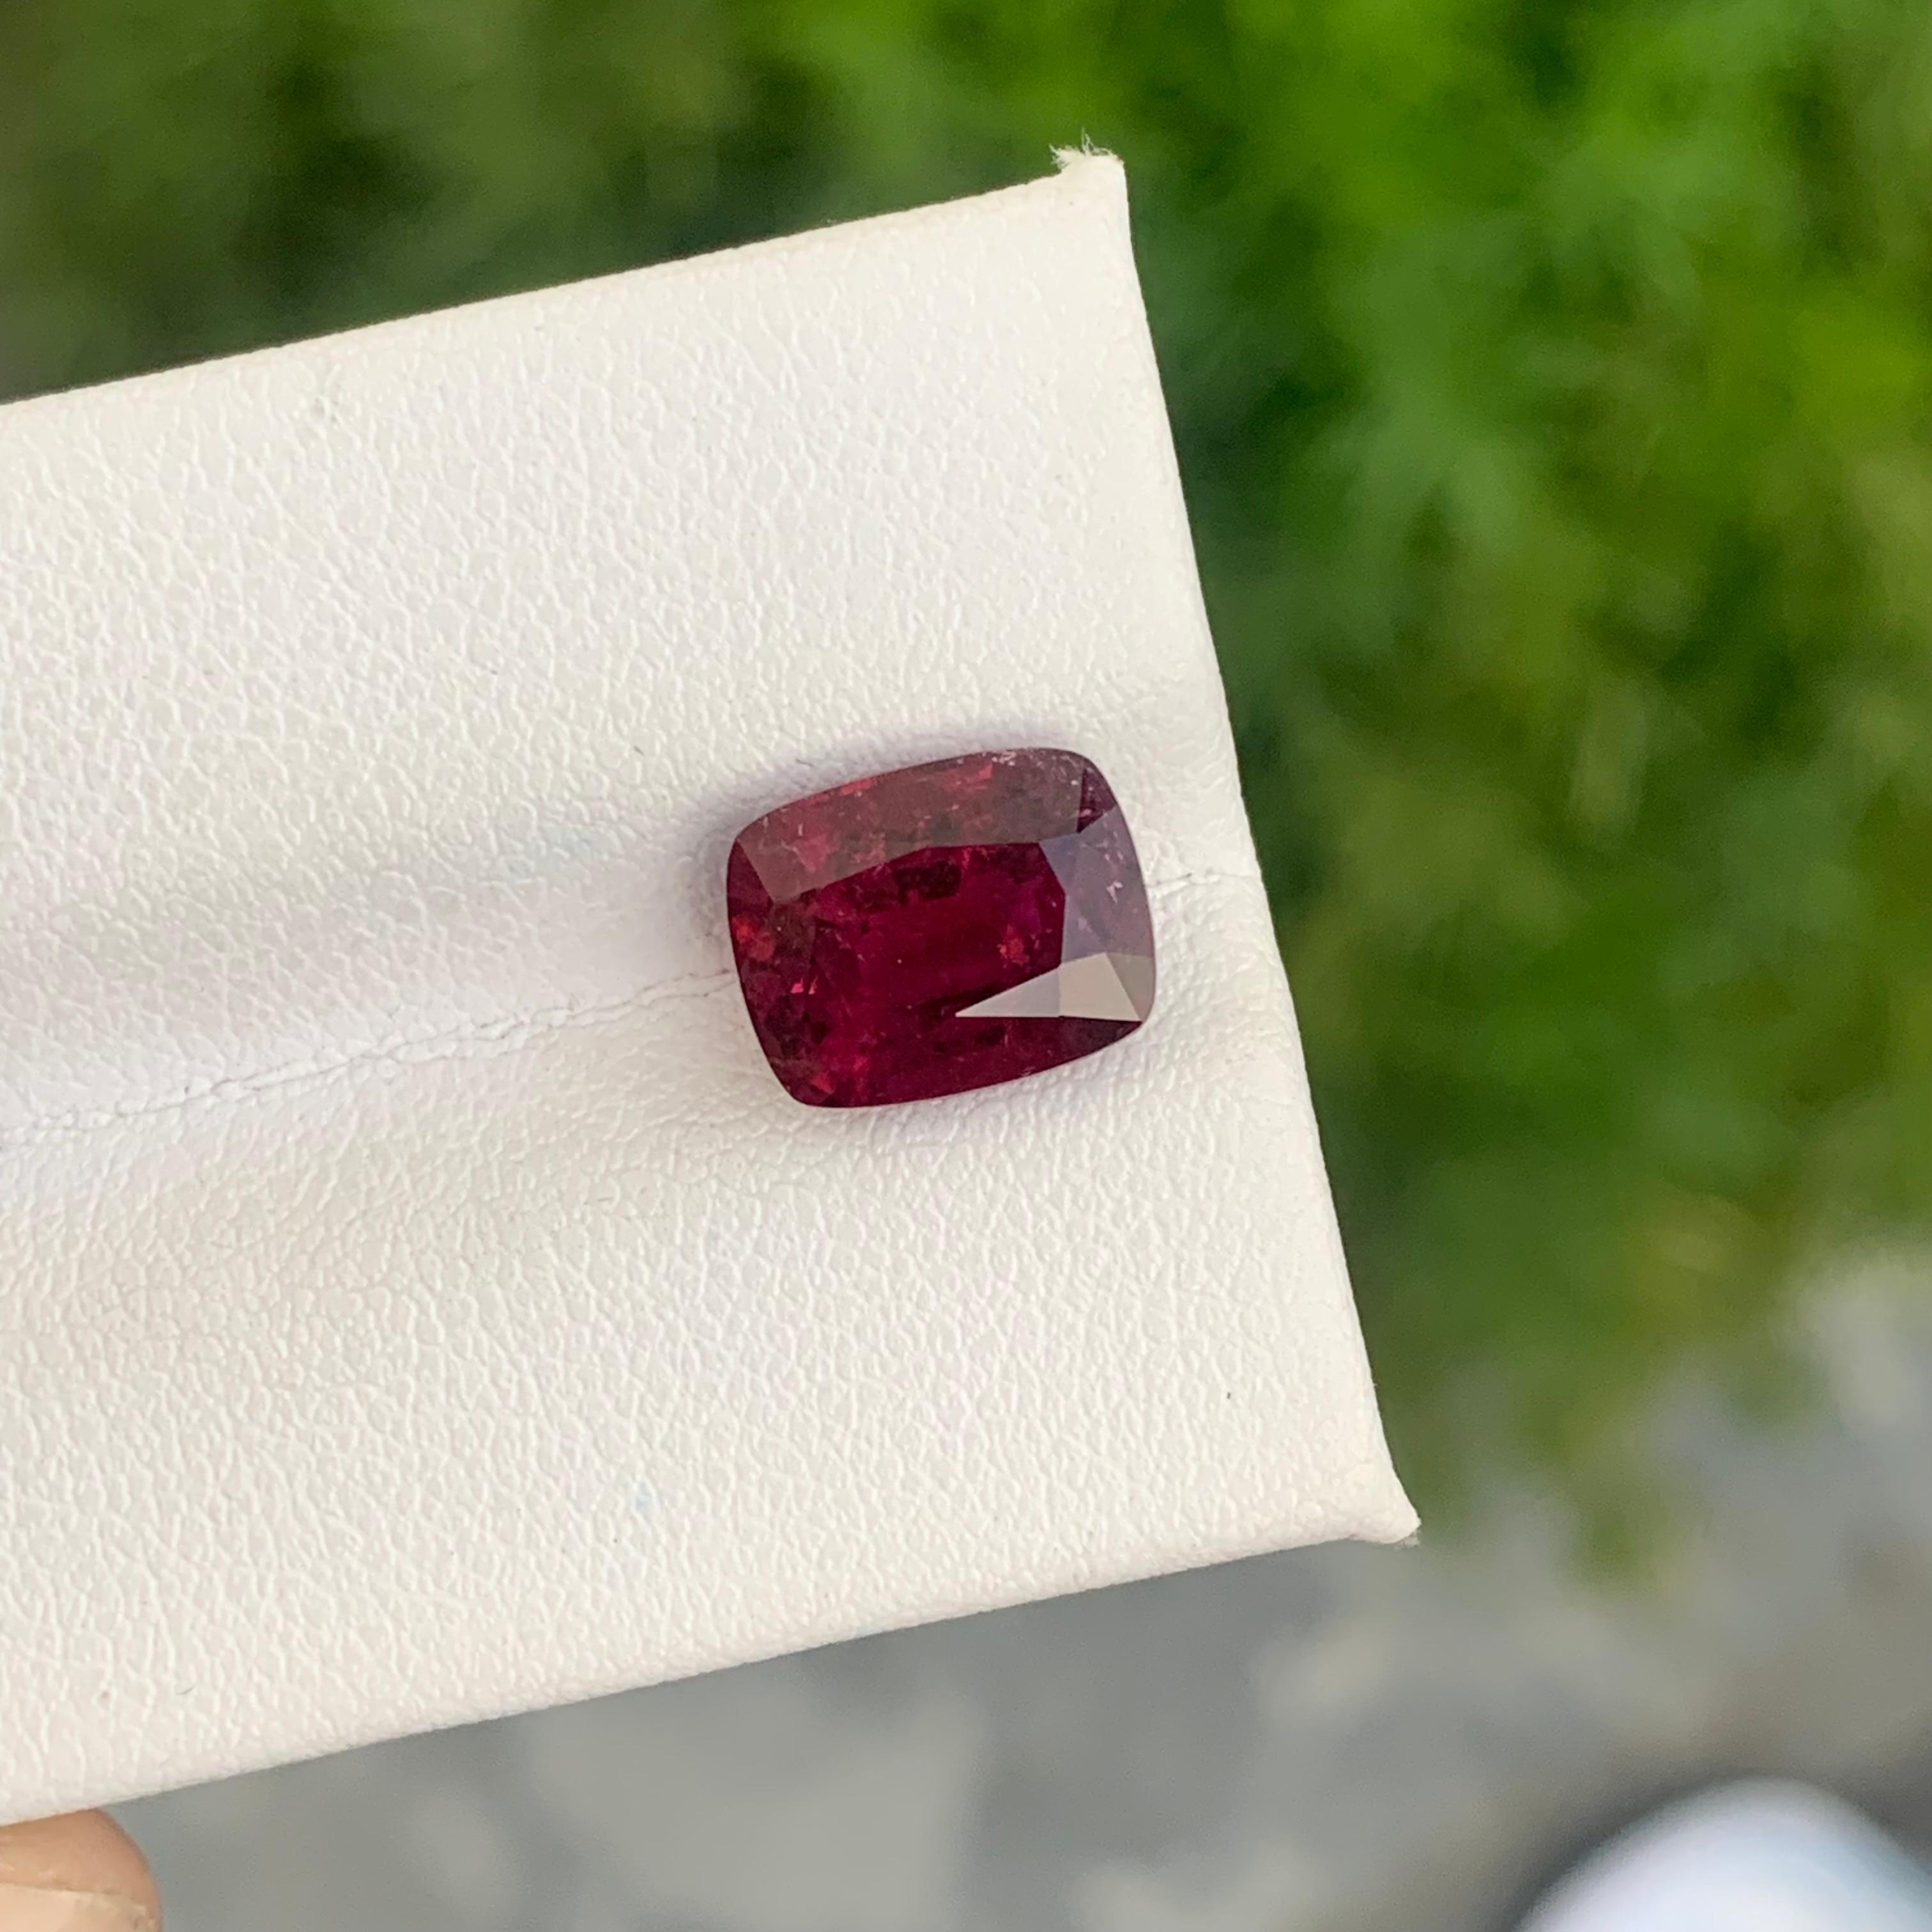 Gemstone Type :  Rubellite Tourmaline
Weight : 3.95 Carats
Dimensions : 10x8x6.1 Mm
Origin : Africa 
Clarity :  SI
Shape: Cushion
Color: Pink Red
Certificate: On Demand
The rubellite is a transparent gemstone from the colorful family of the